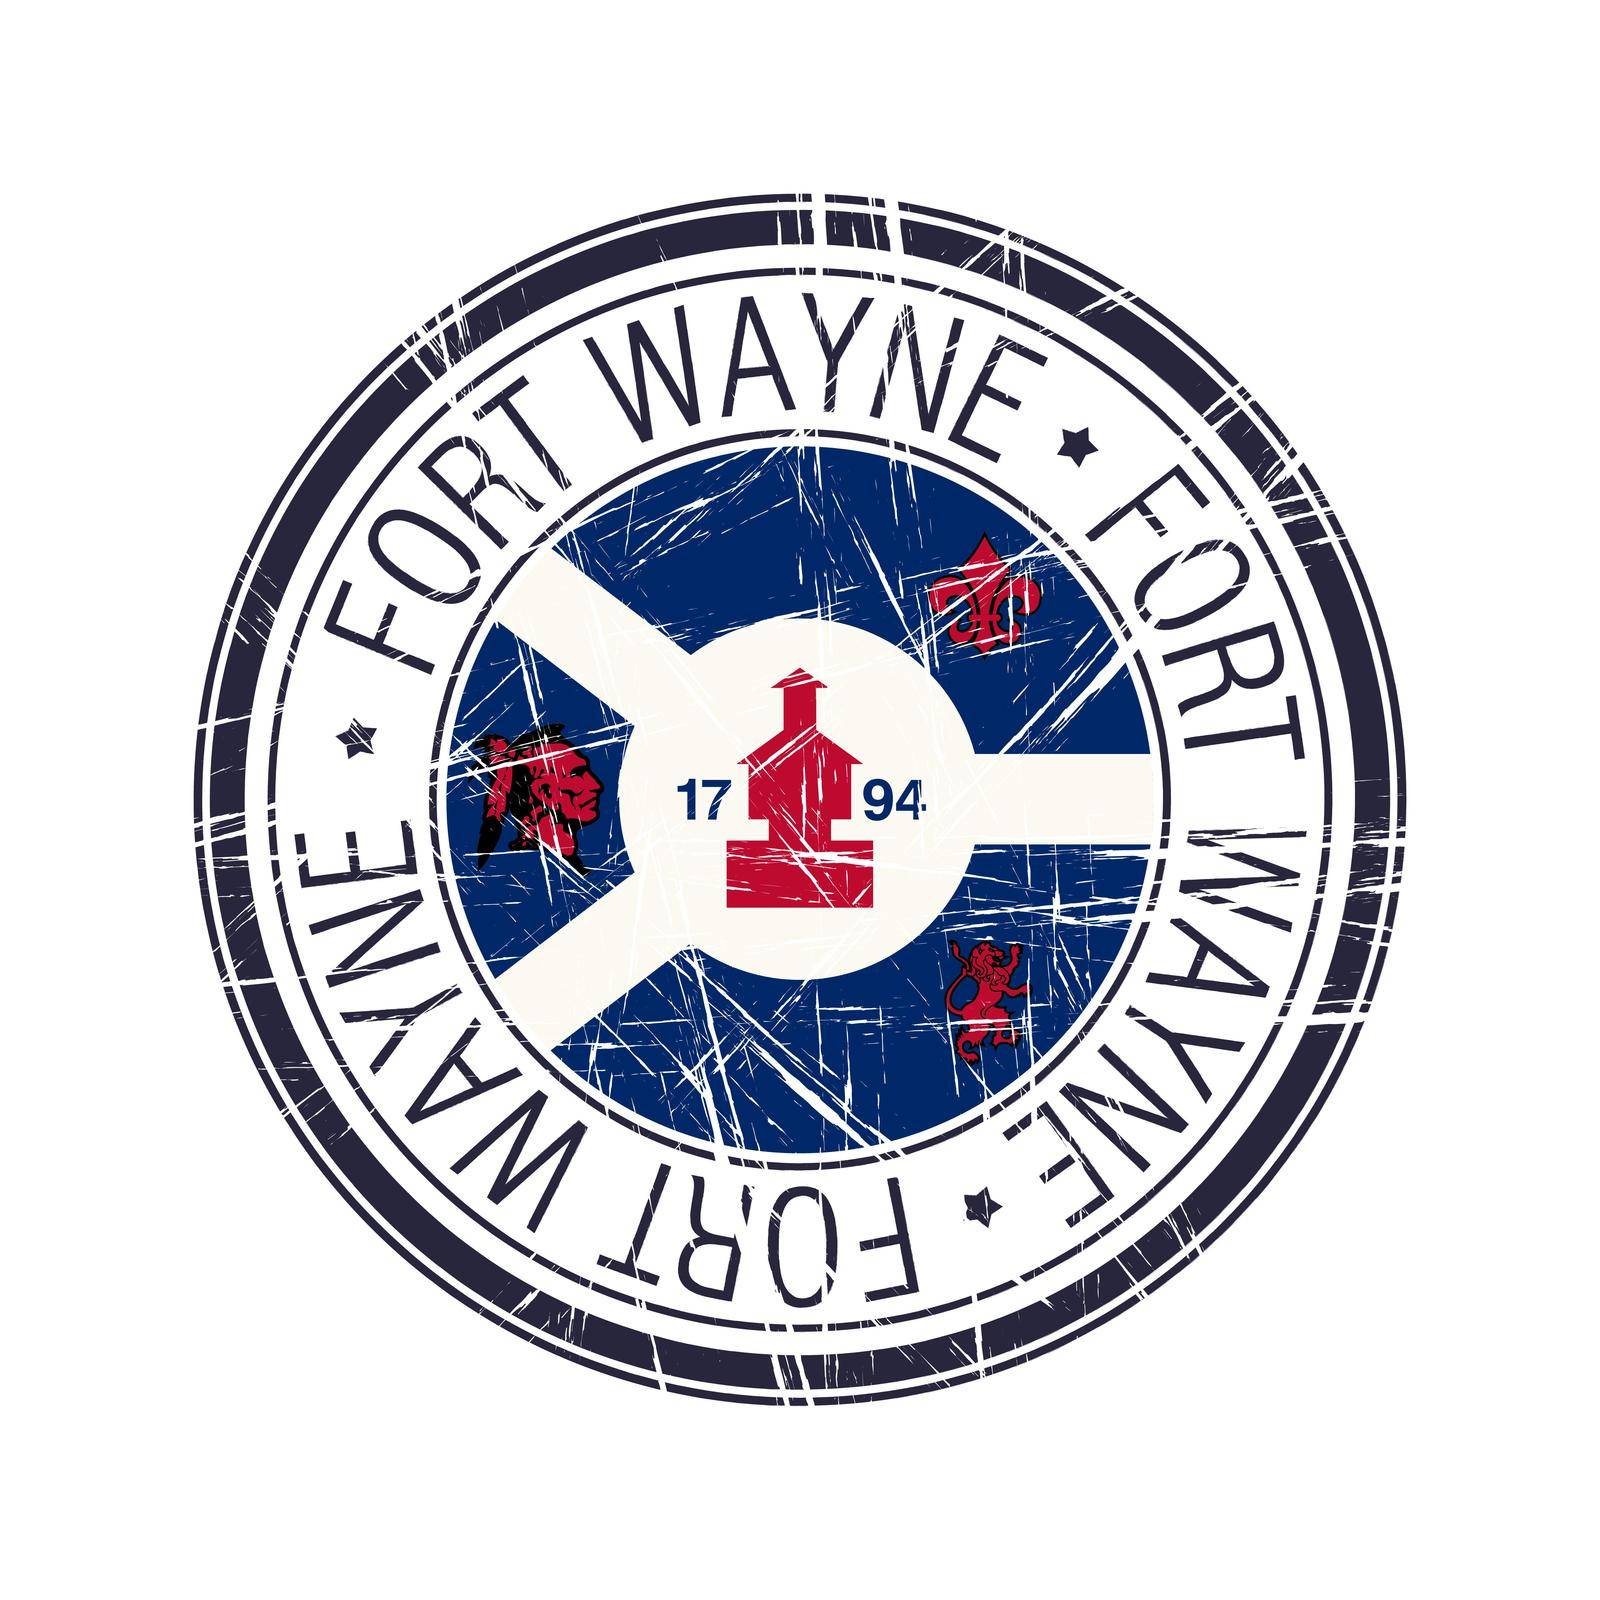 City of Fort Wayne, Indiana vector stamp by Lirch